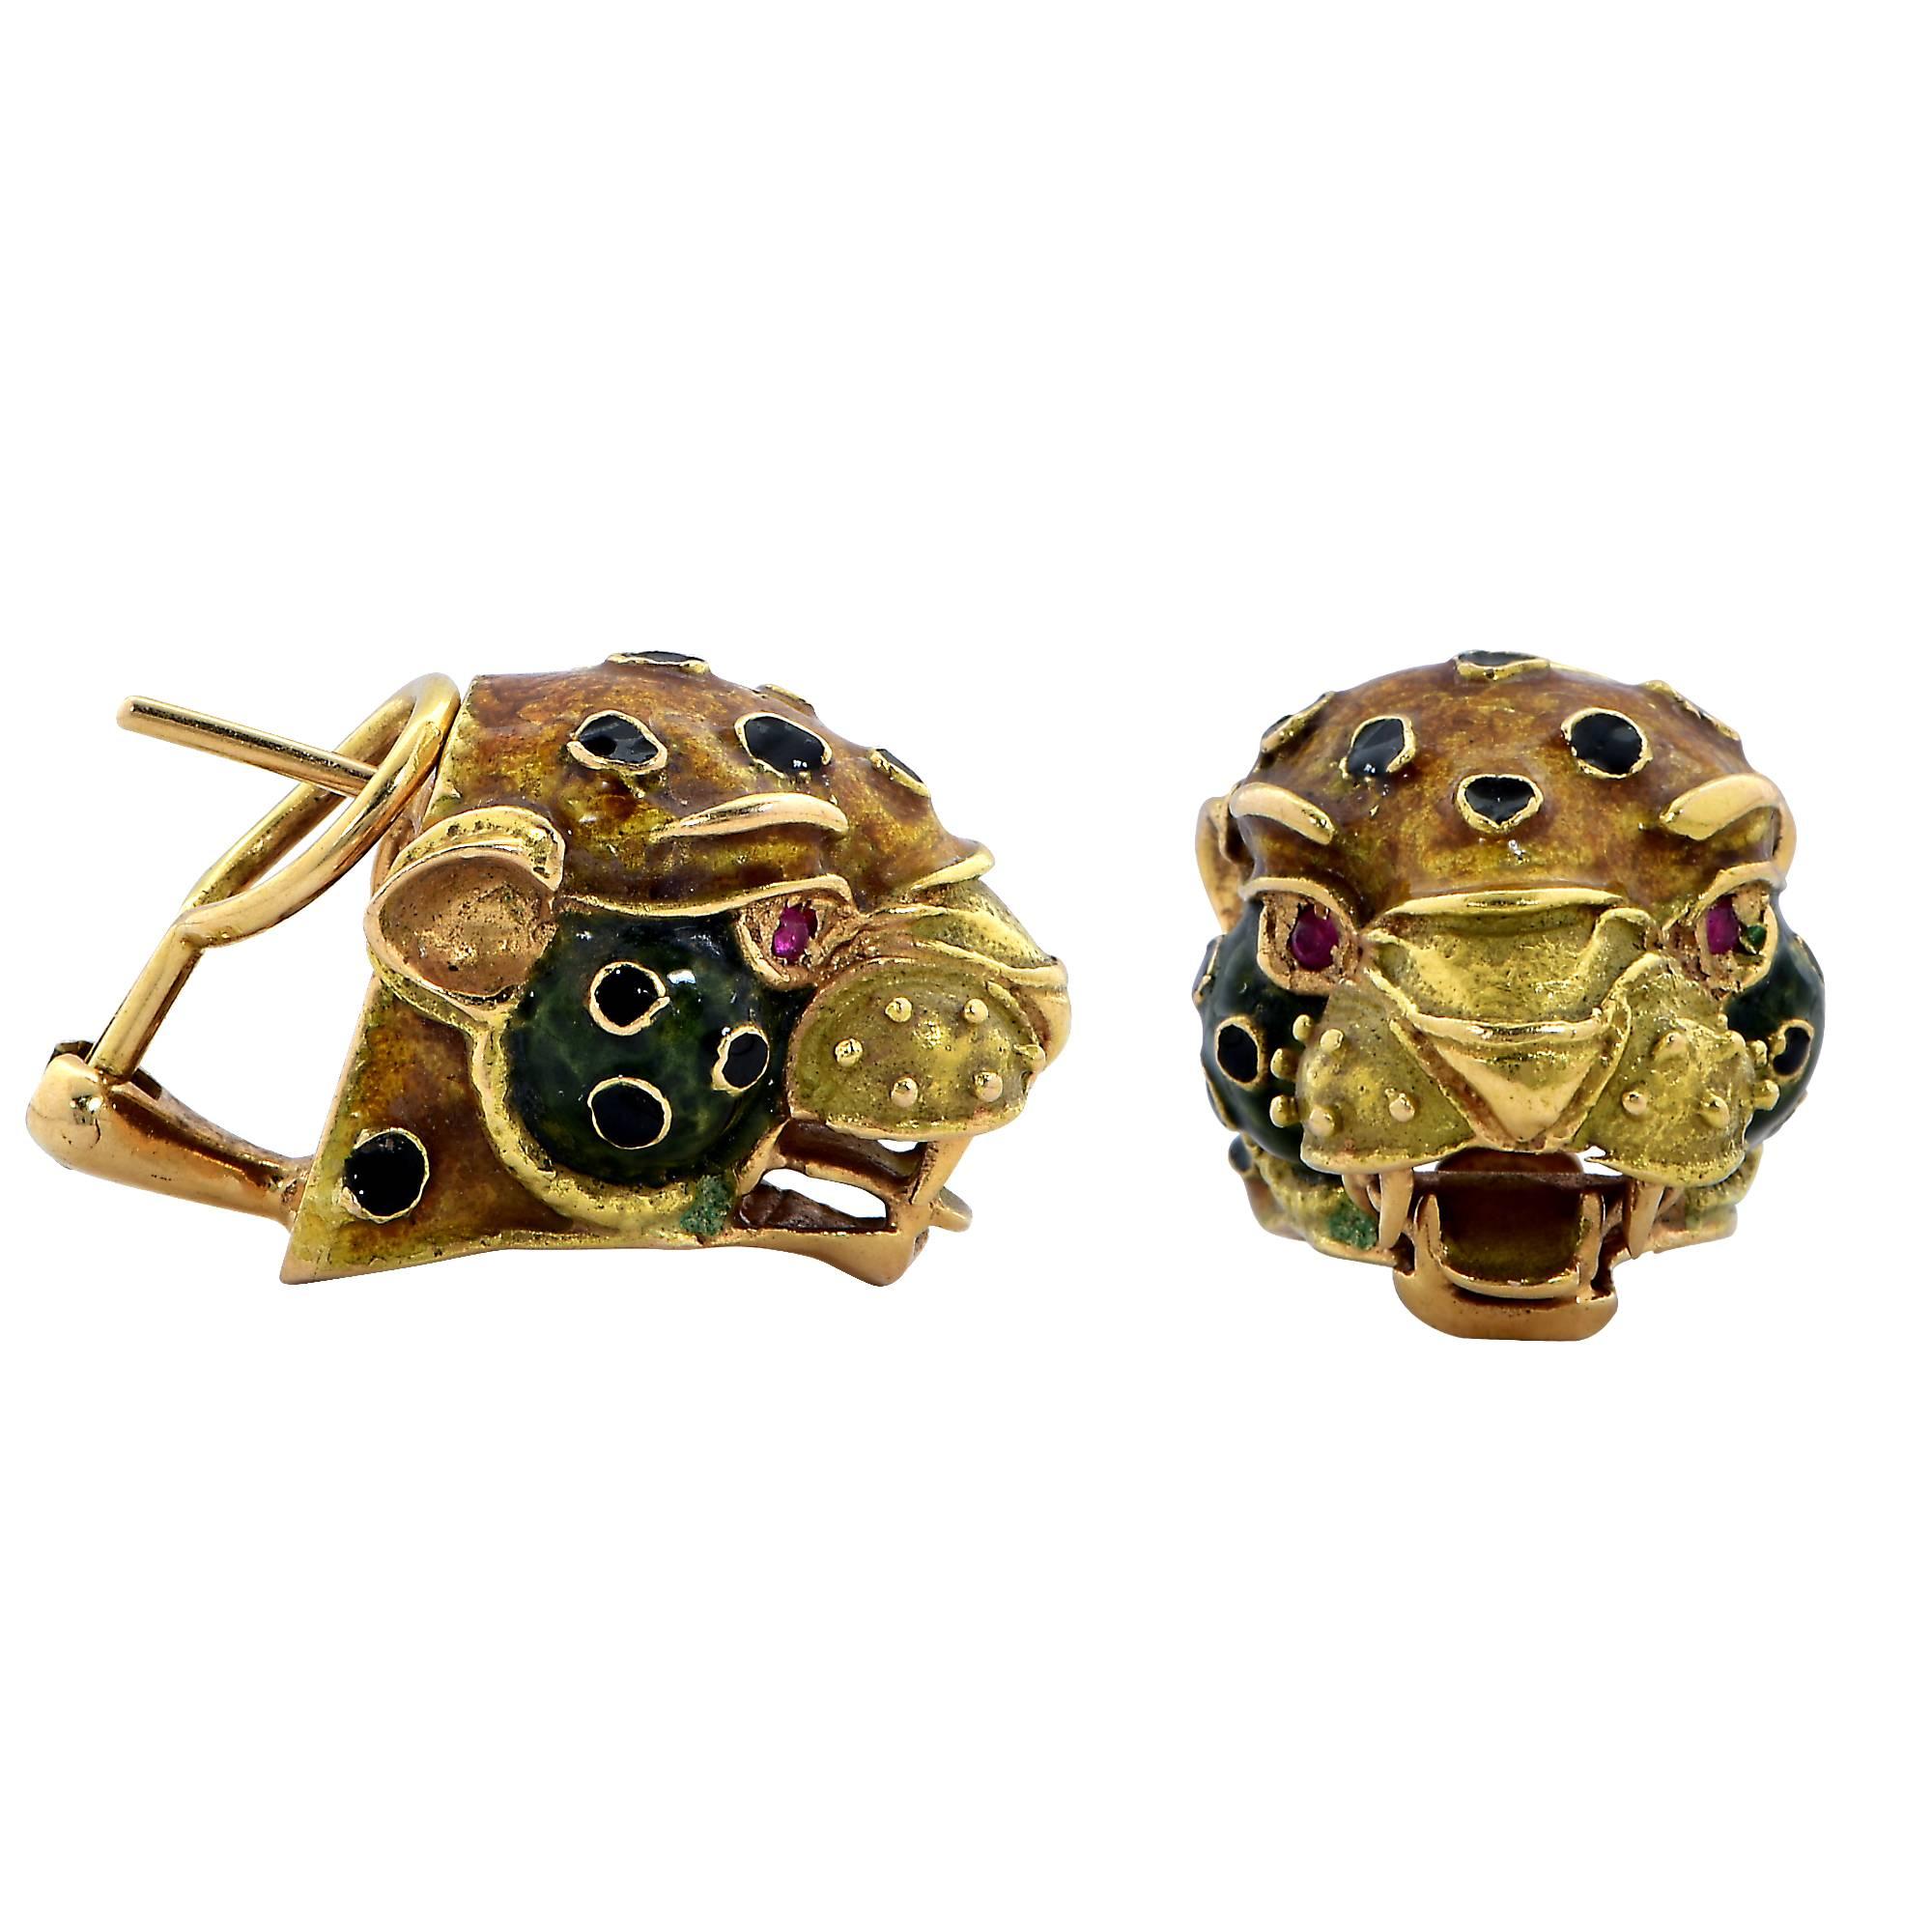 Crafted in 18k yellow gold these earrings feature leopards adorned with vibrant yellow and green enamel. From Spain this fourth generation family of jewelers have bestowed tradition, high technological and ancestral techniques of their culture. The